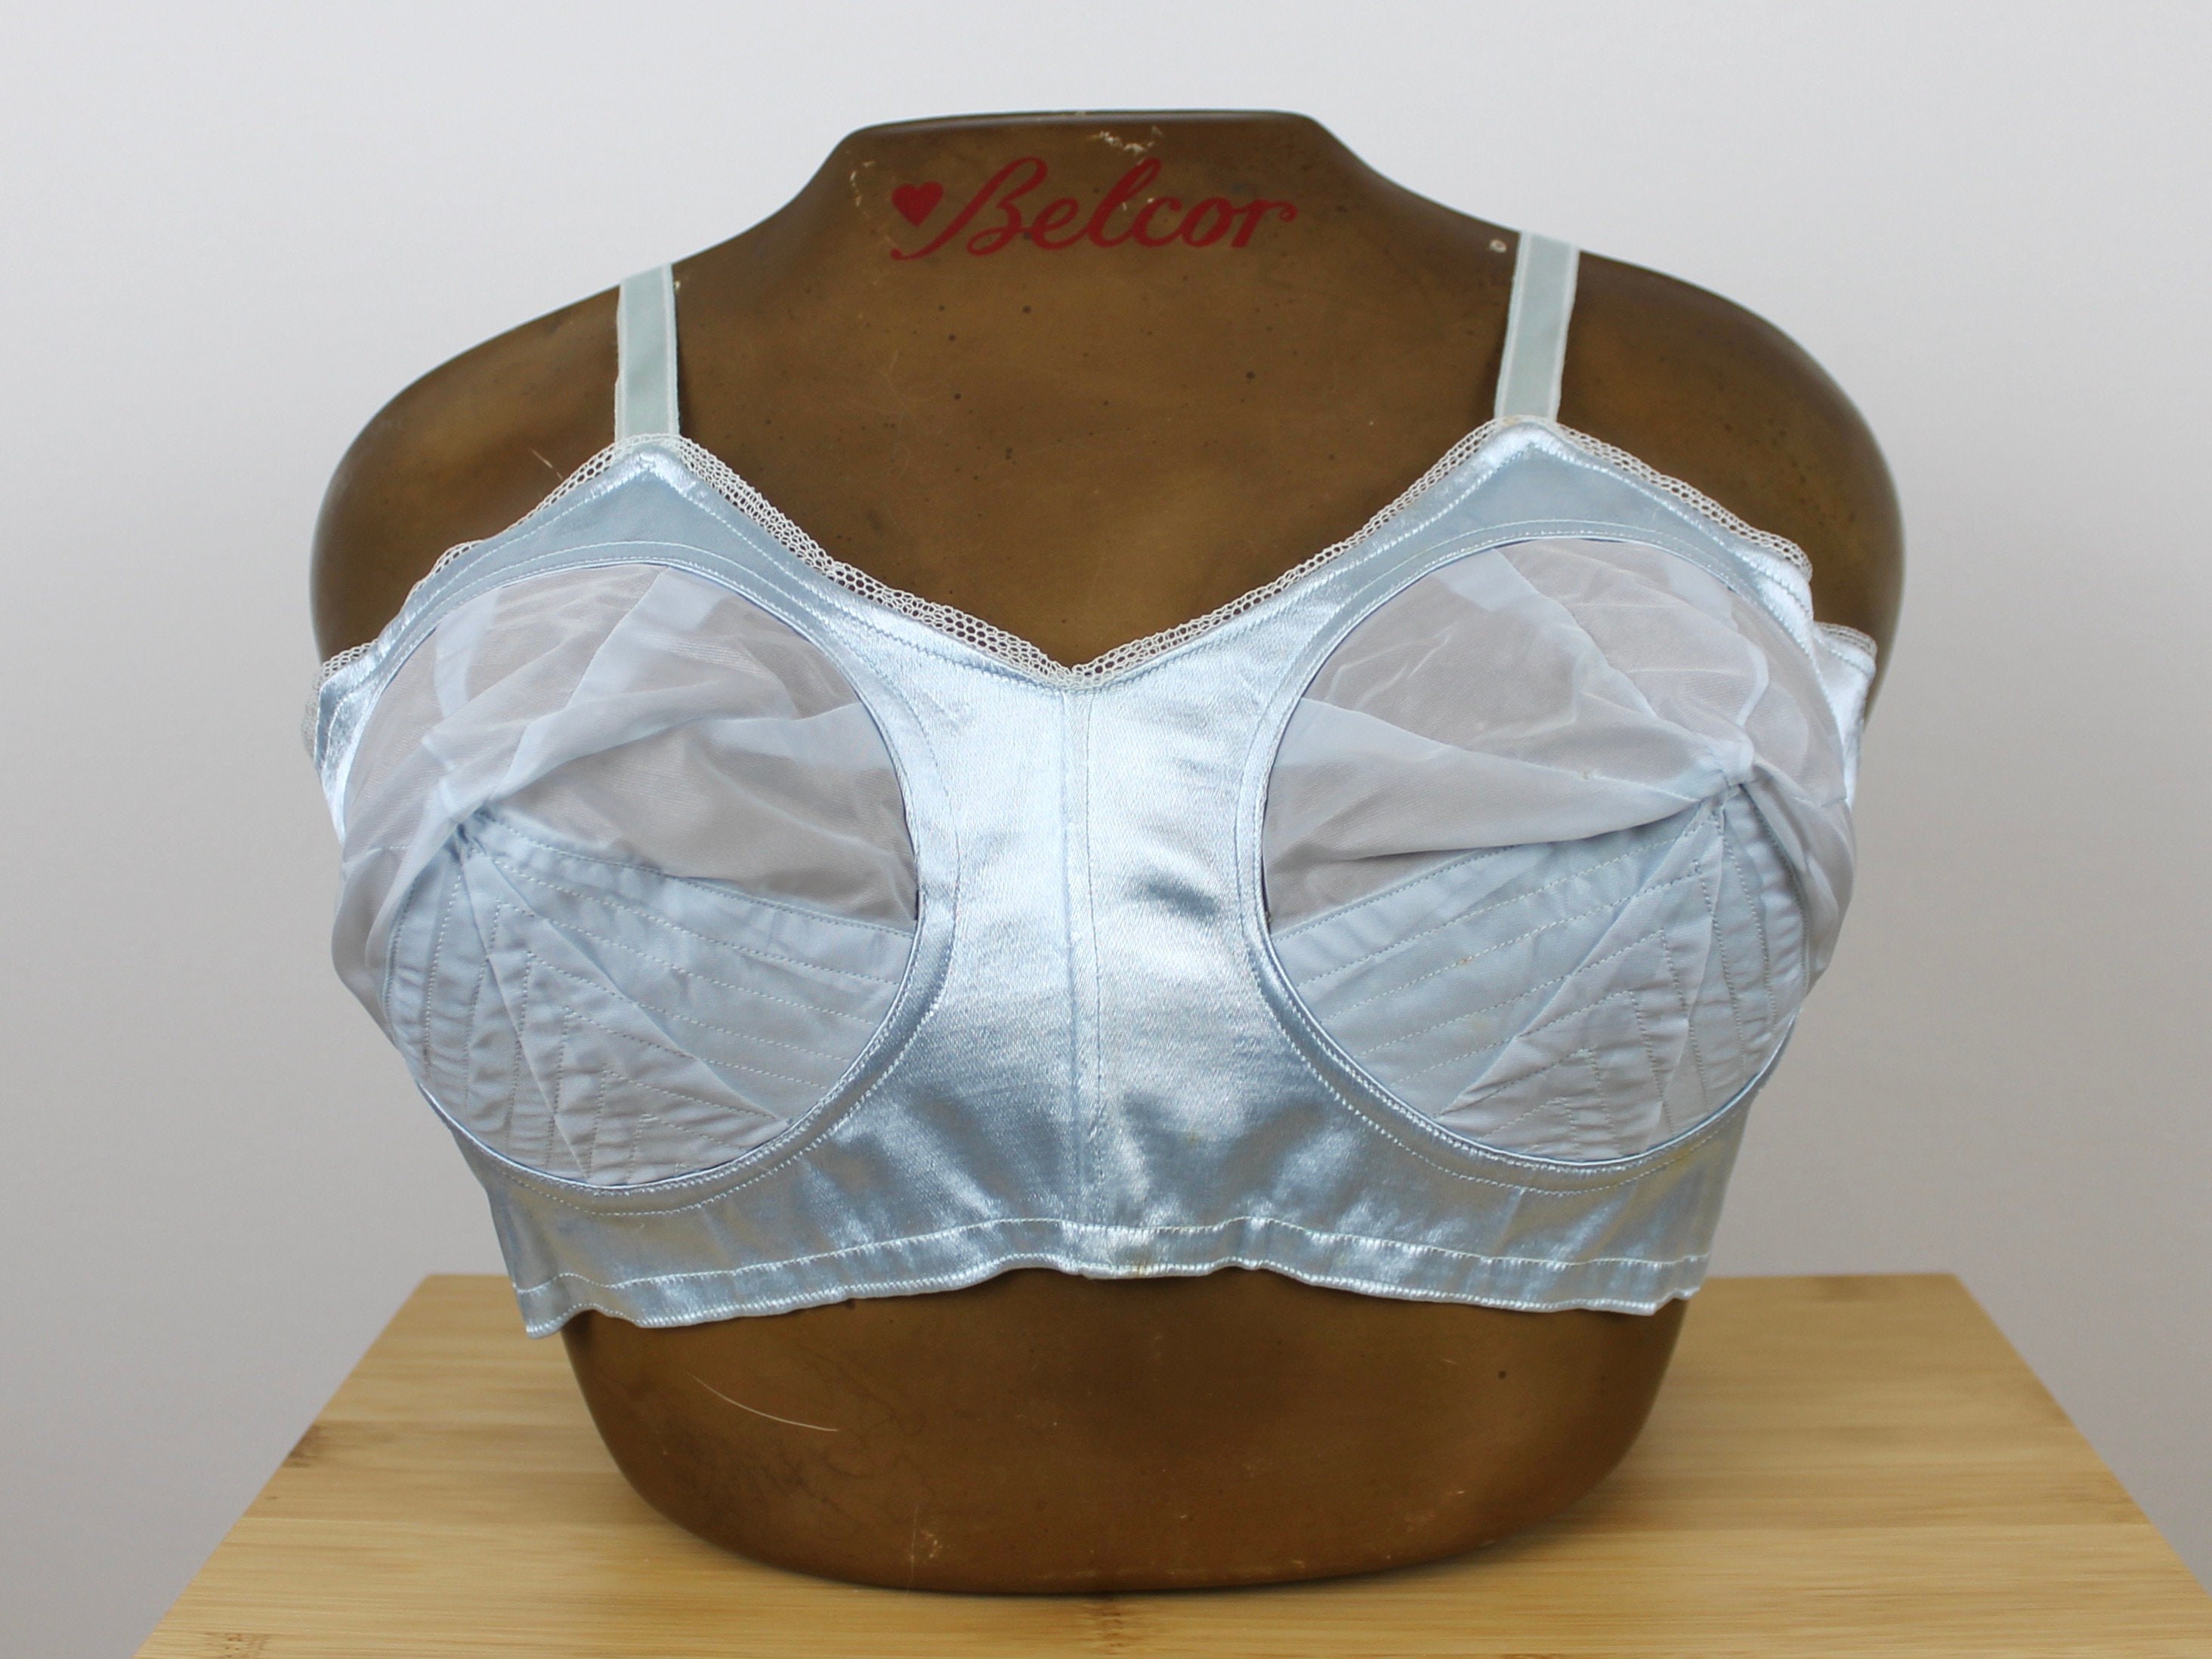 Six Impossible Things: I want a bullet bra!